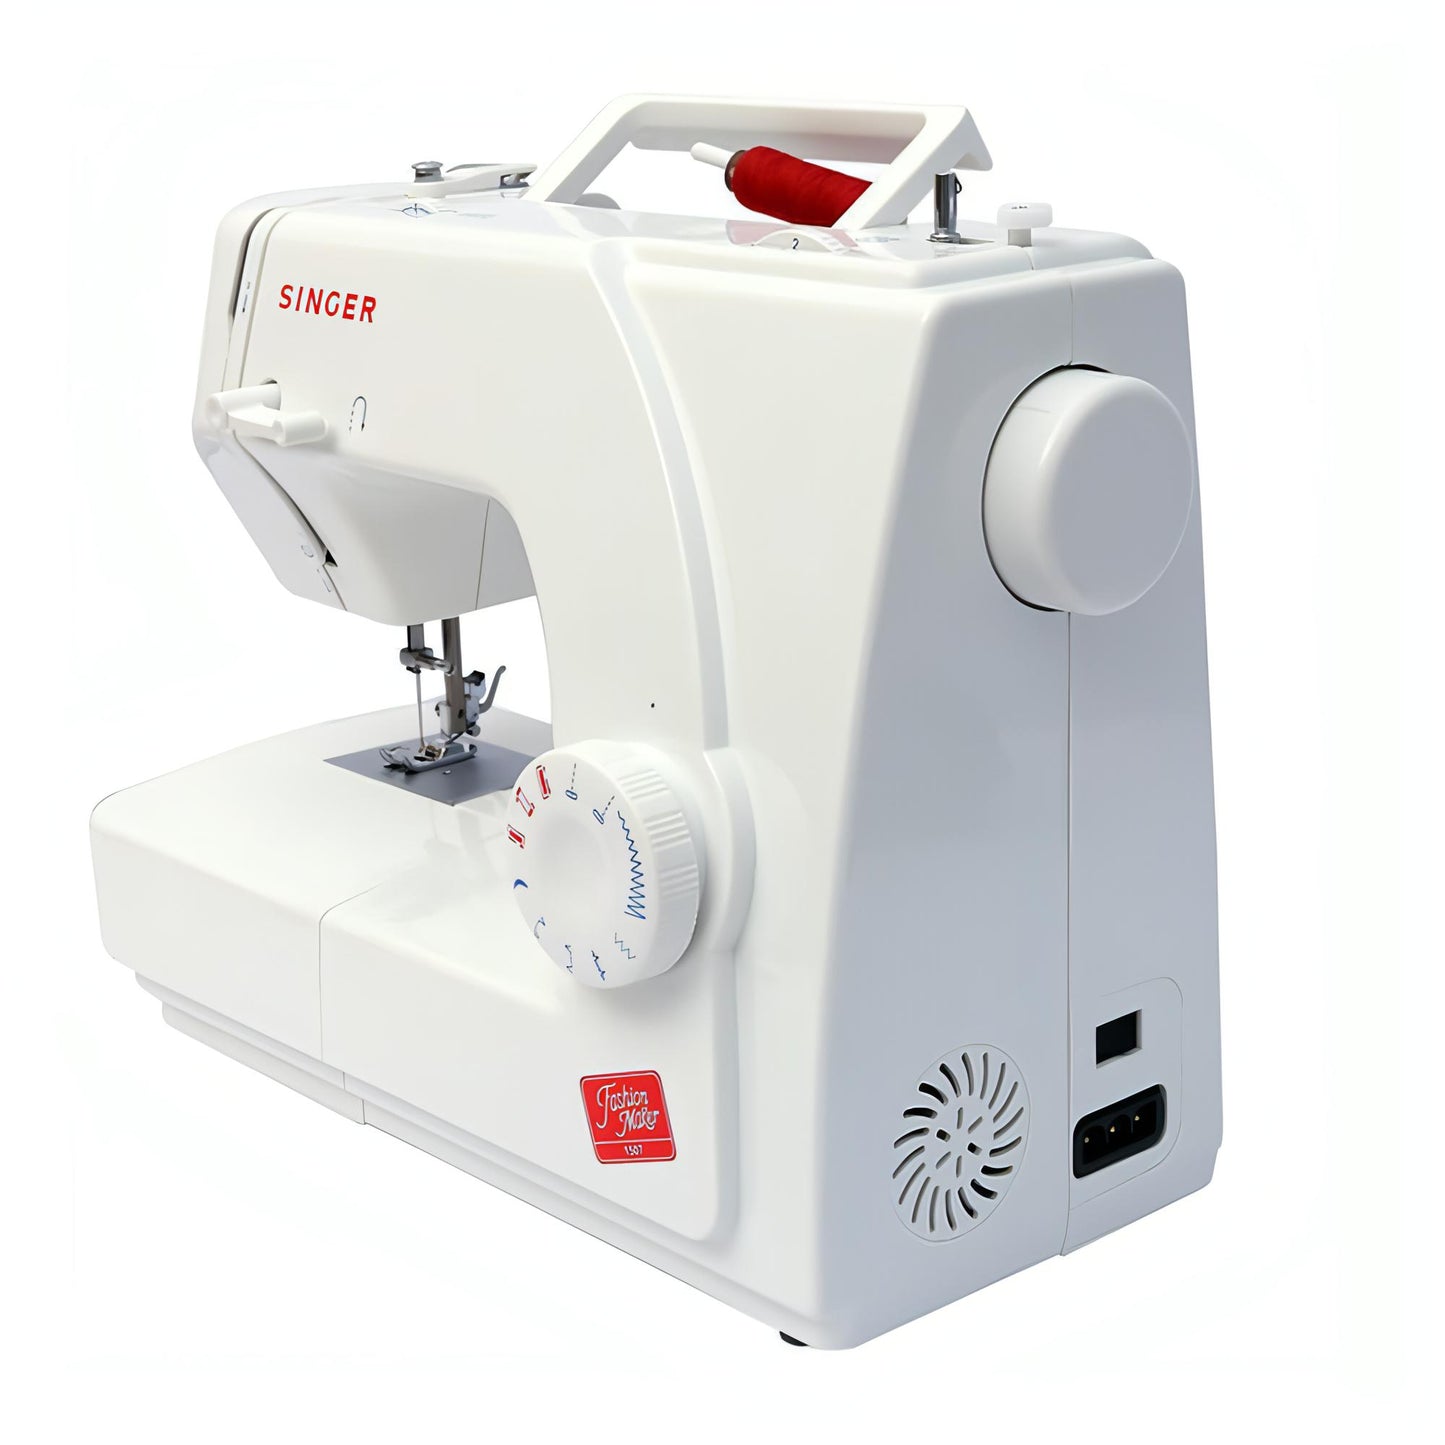 Singer Fashion Maker 1507NT Sewing Machine with Automatic Needle Threader * Special Edition *